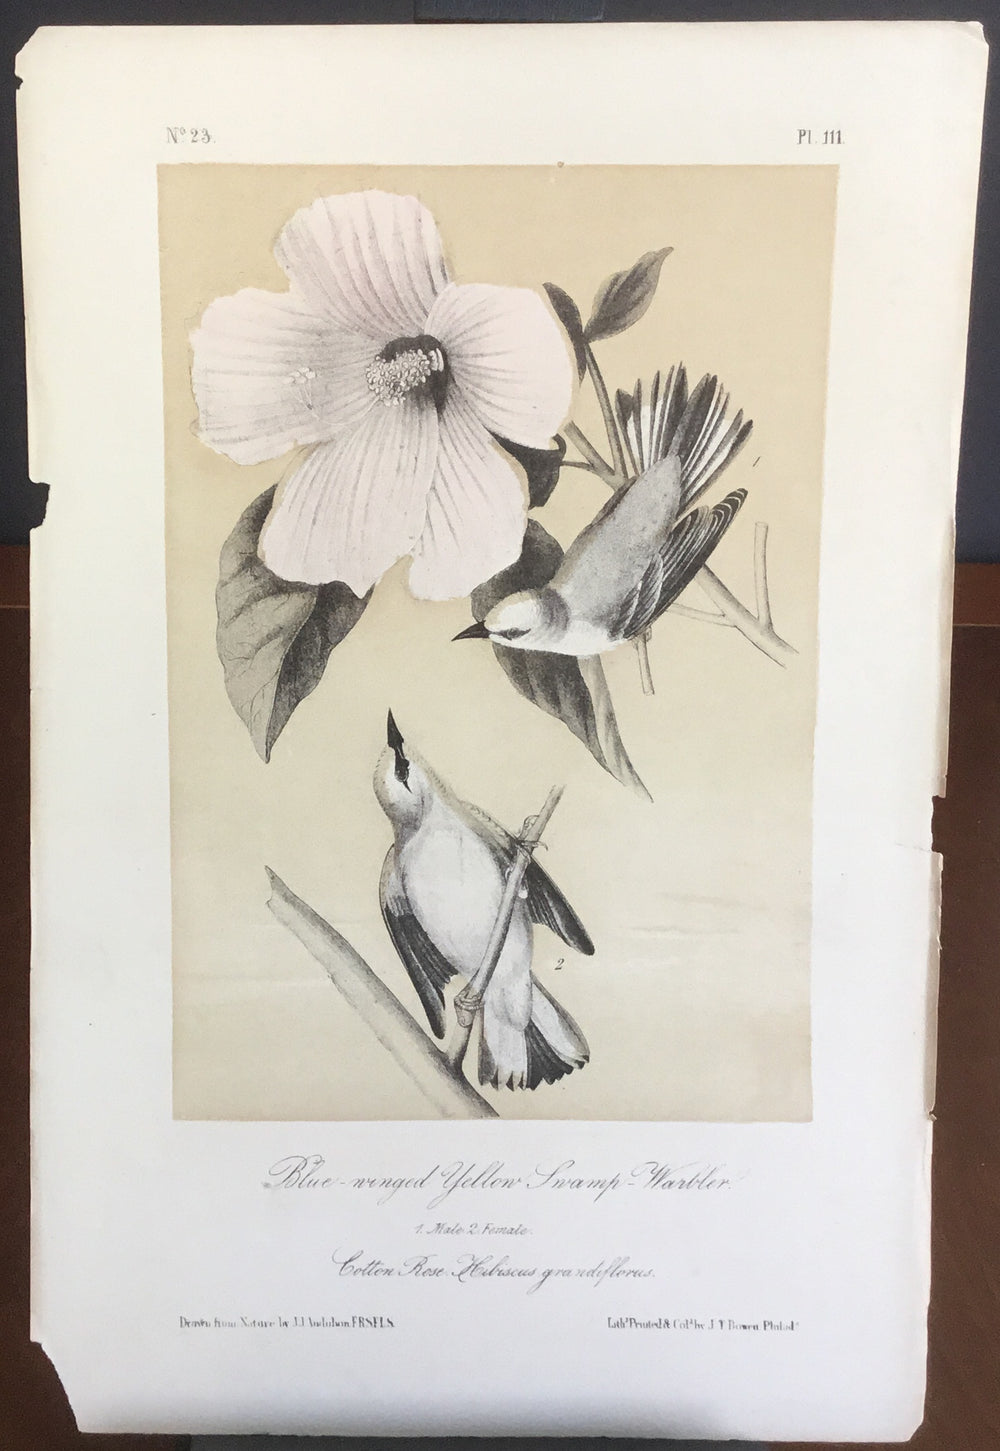 Audubon Octavo Blue-winged Yellow Swamp Warbler (2), plate 111, uncolored test sheet, 7 x 11